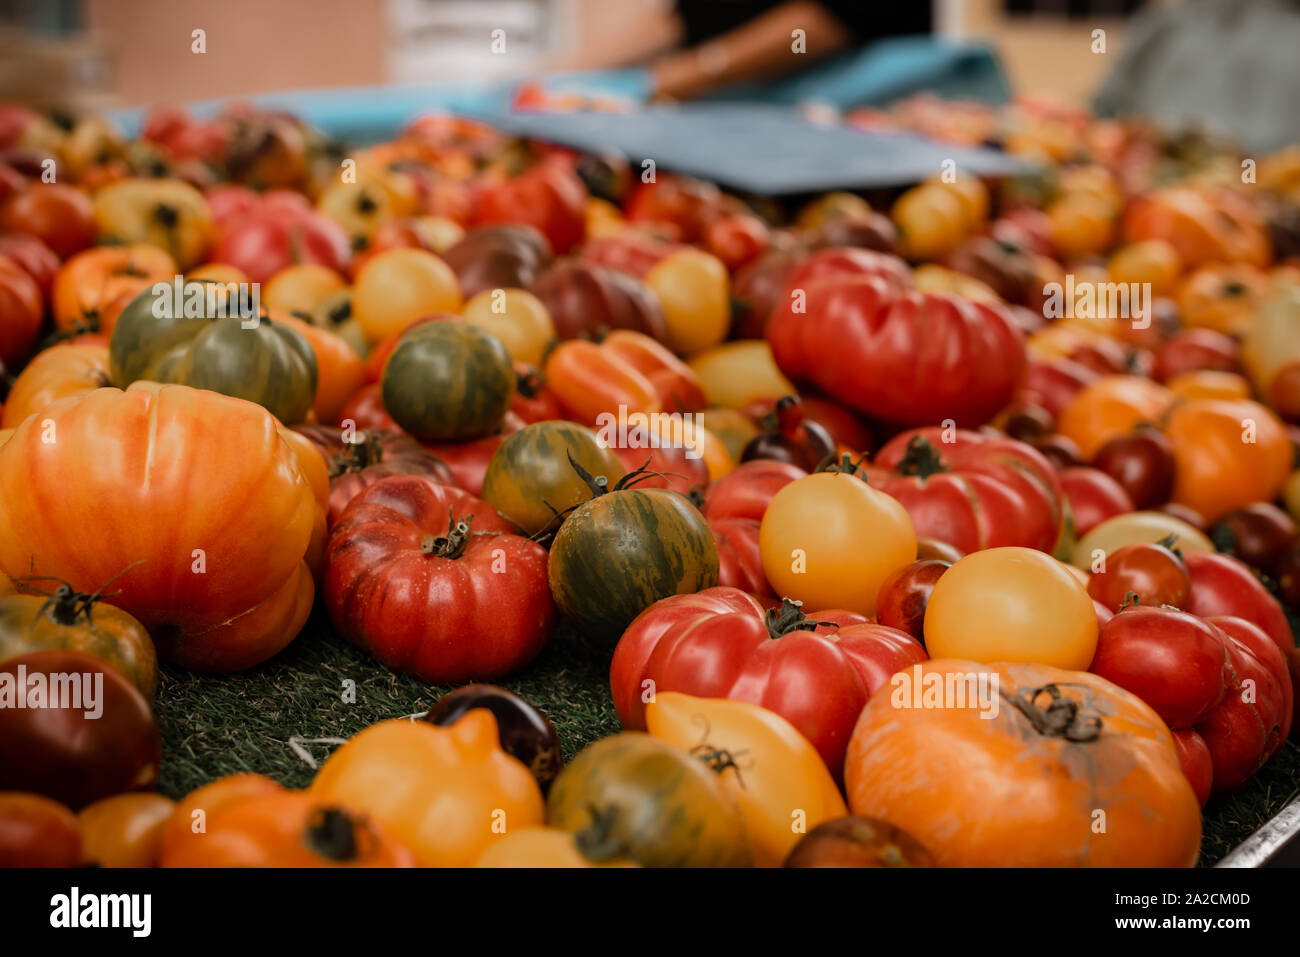 Tomatoes at farmers' market in Provence, France Stock Photo